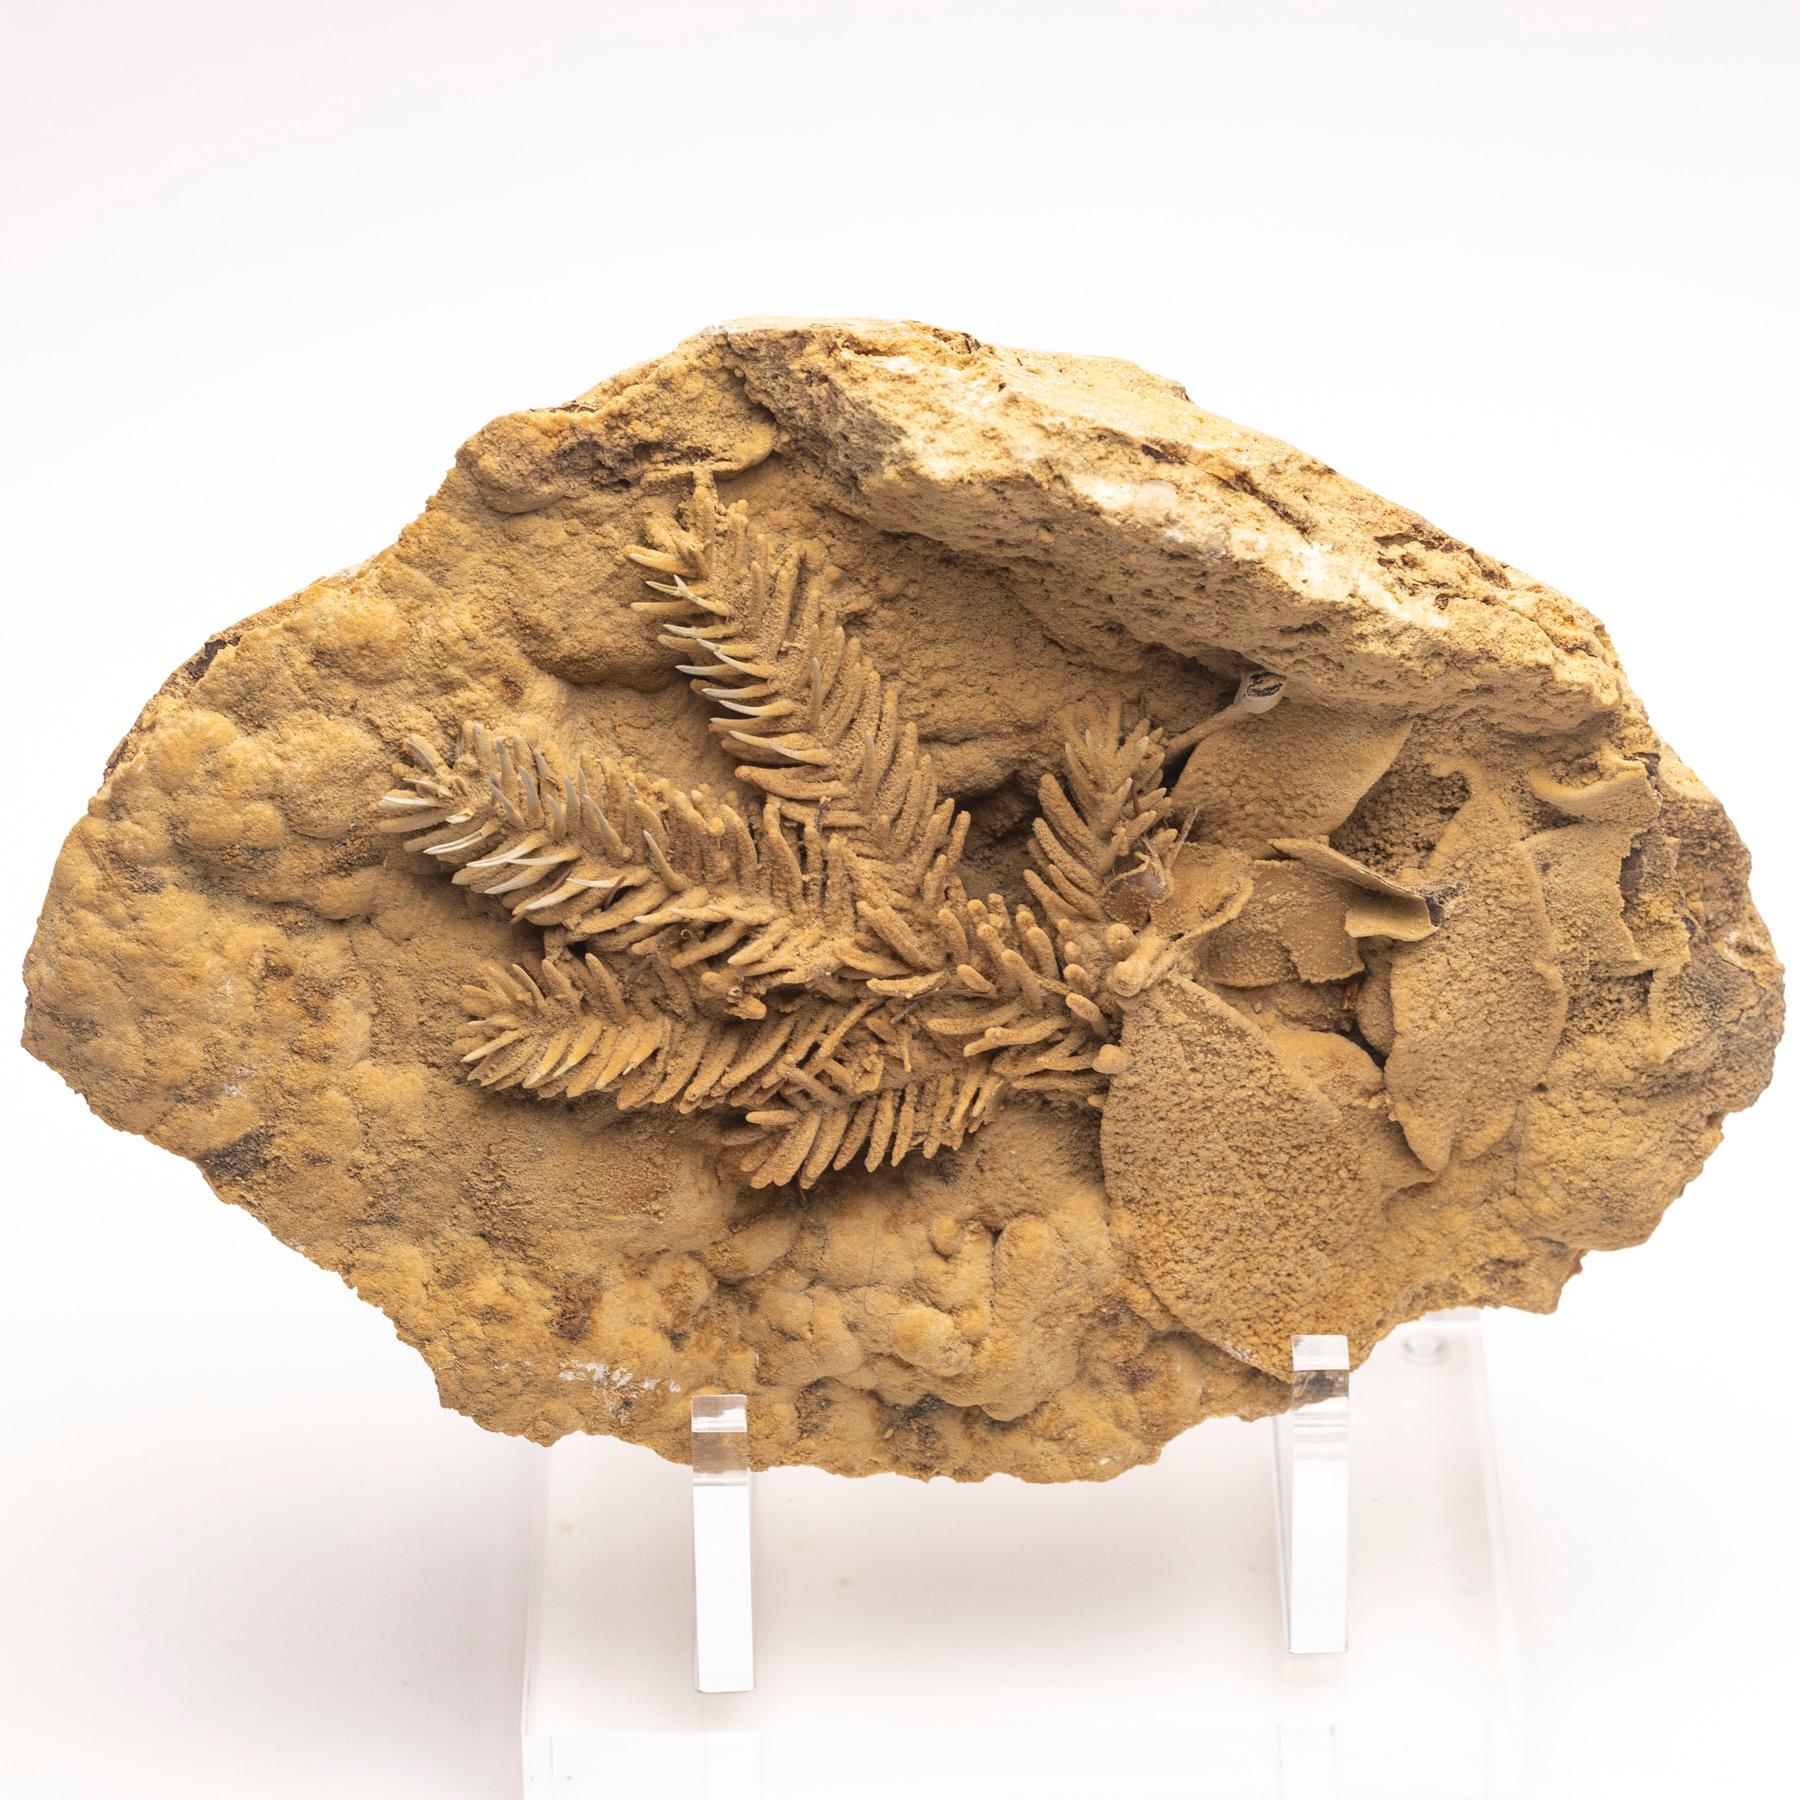 Contemporary Fossil Leave in Travertine from Tyrol, Austria, Pleistocene Period For Sale